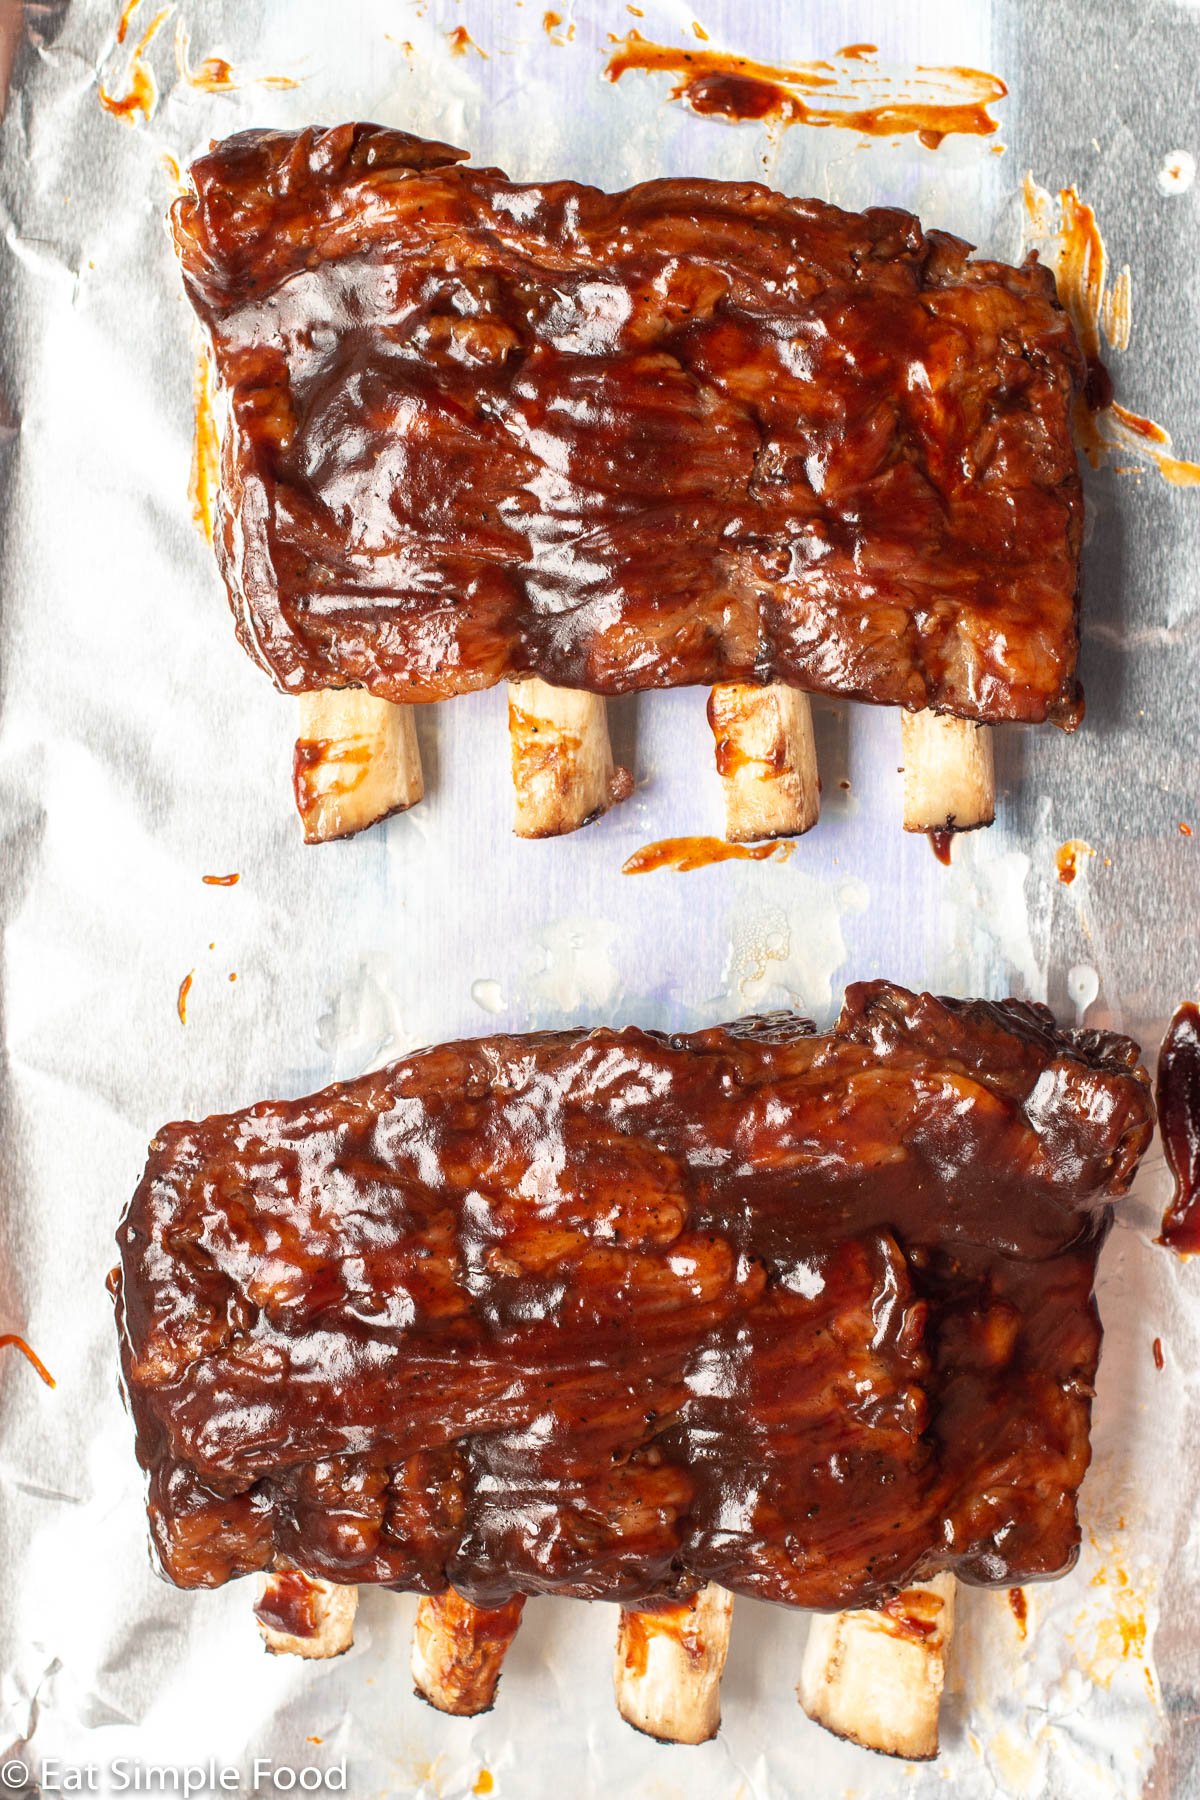 2 racks of beef back ribs slathered in barbecue sauce on an aluminum lined sheet pan.